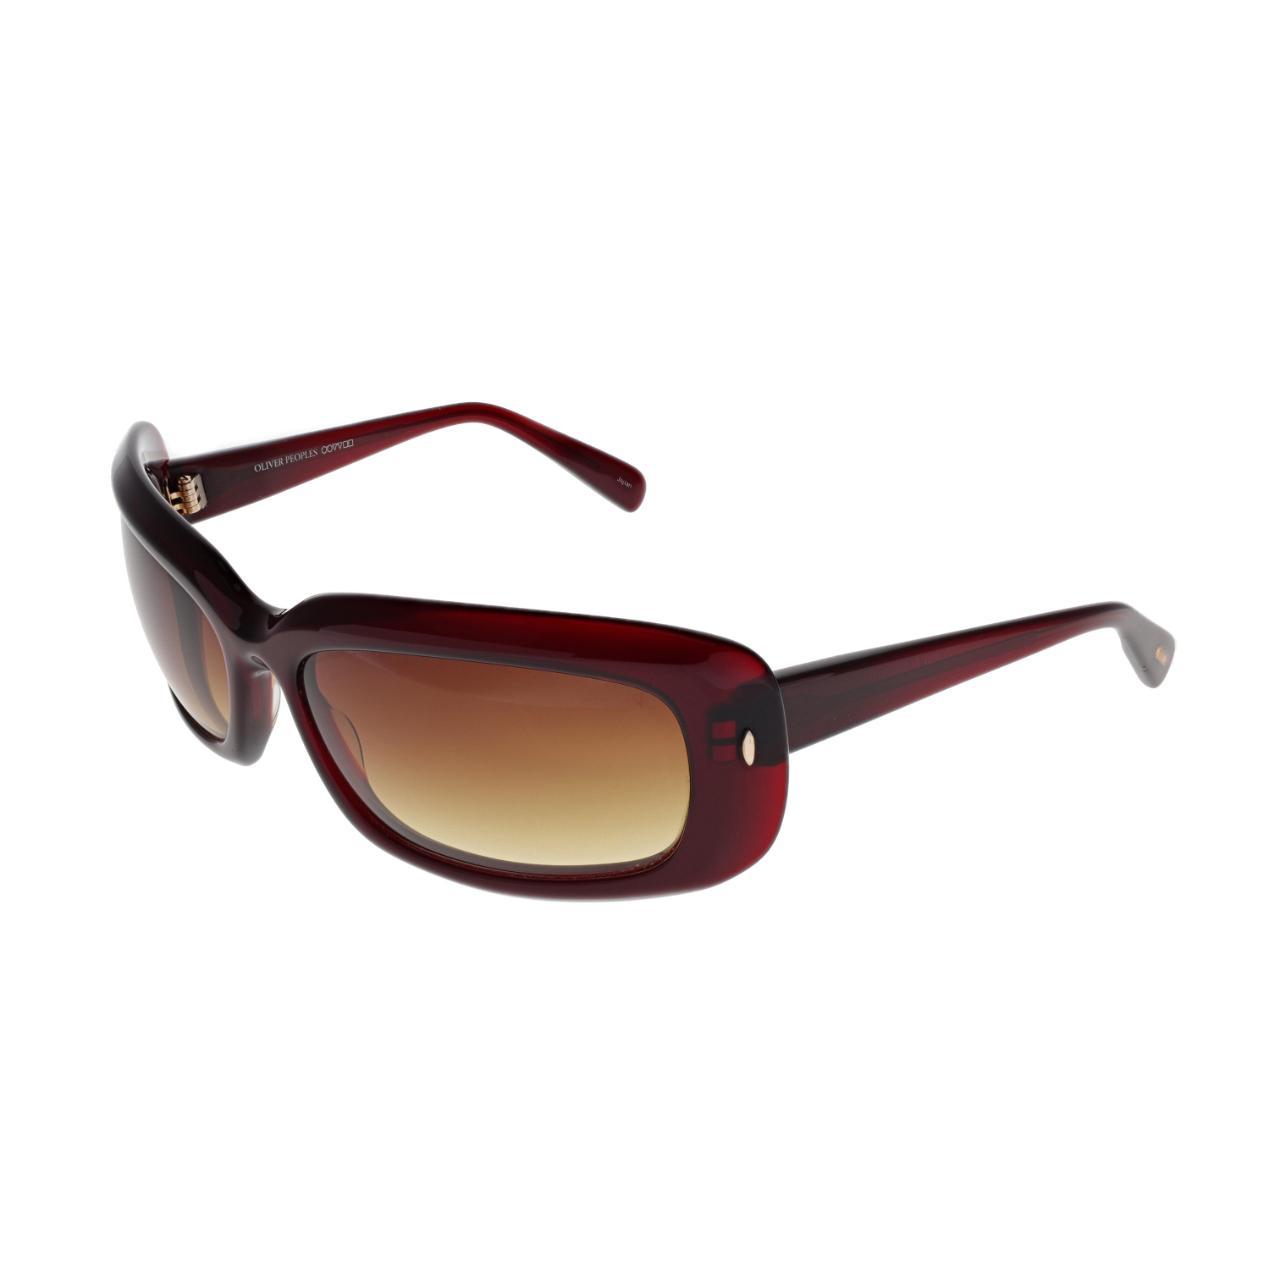 Product Image 1 - OLIVER PEOPLES INGENUE SUNGLASSES

Oliver Peoples